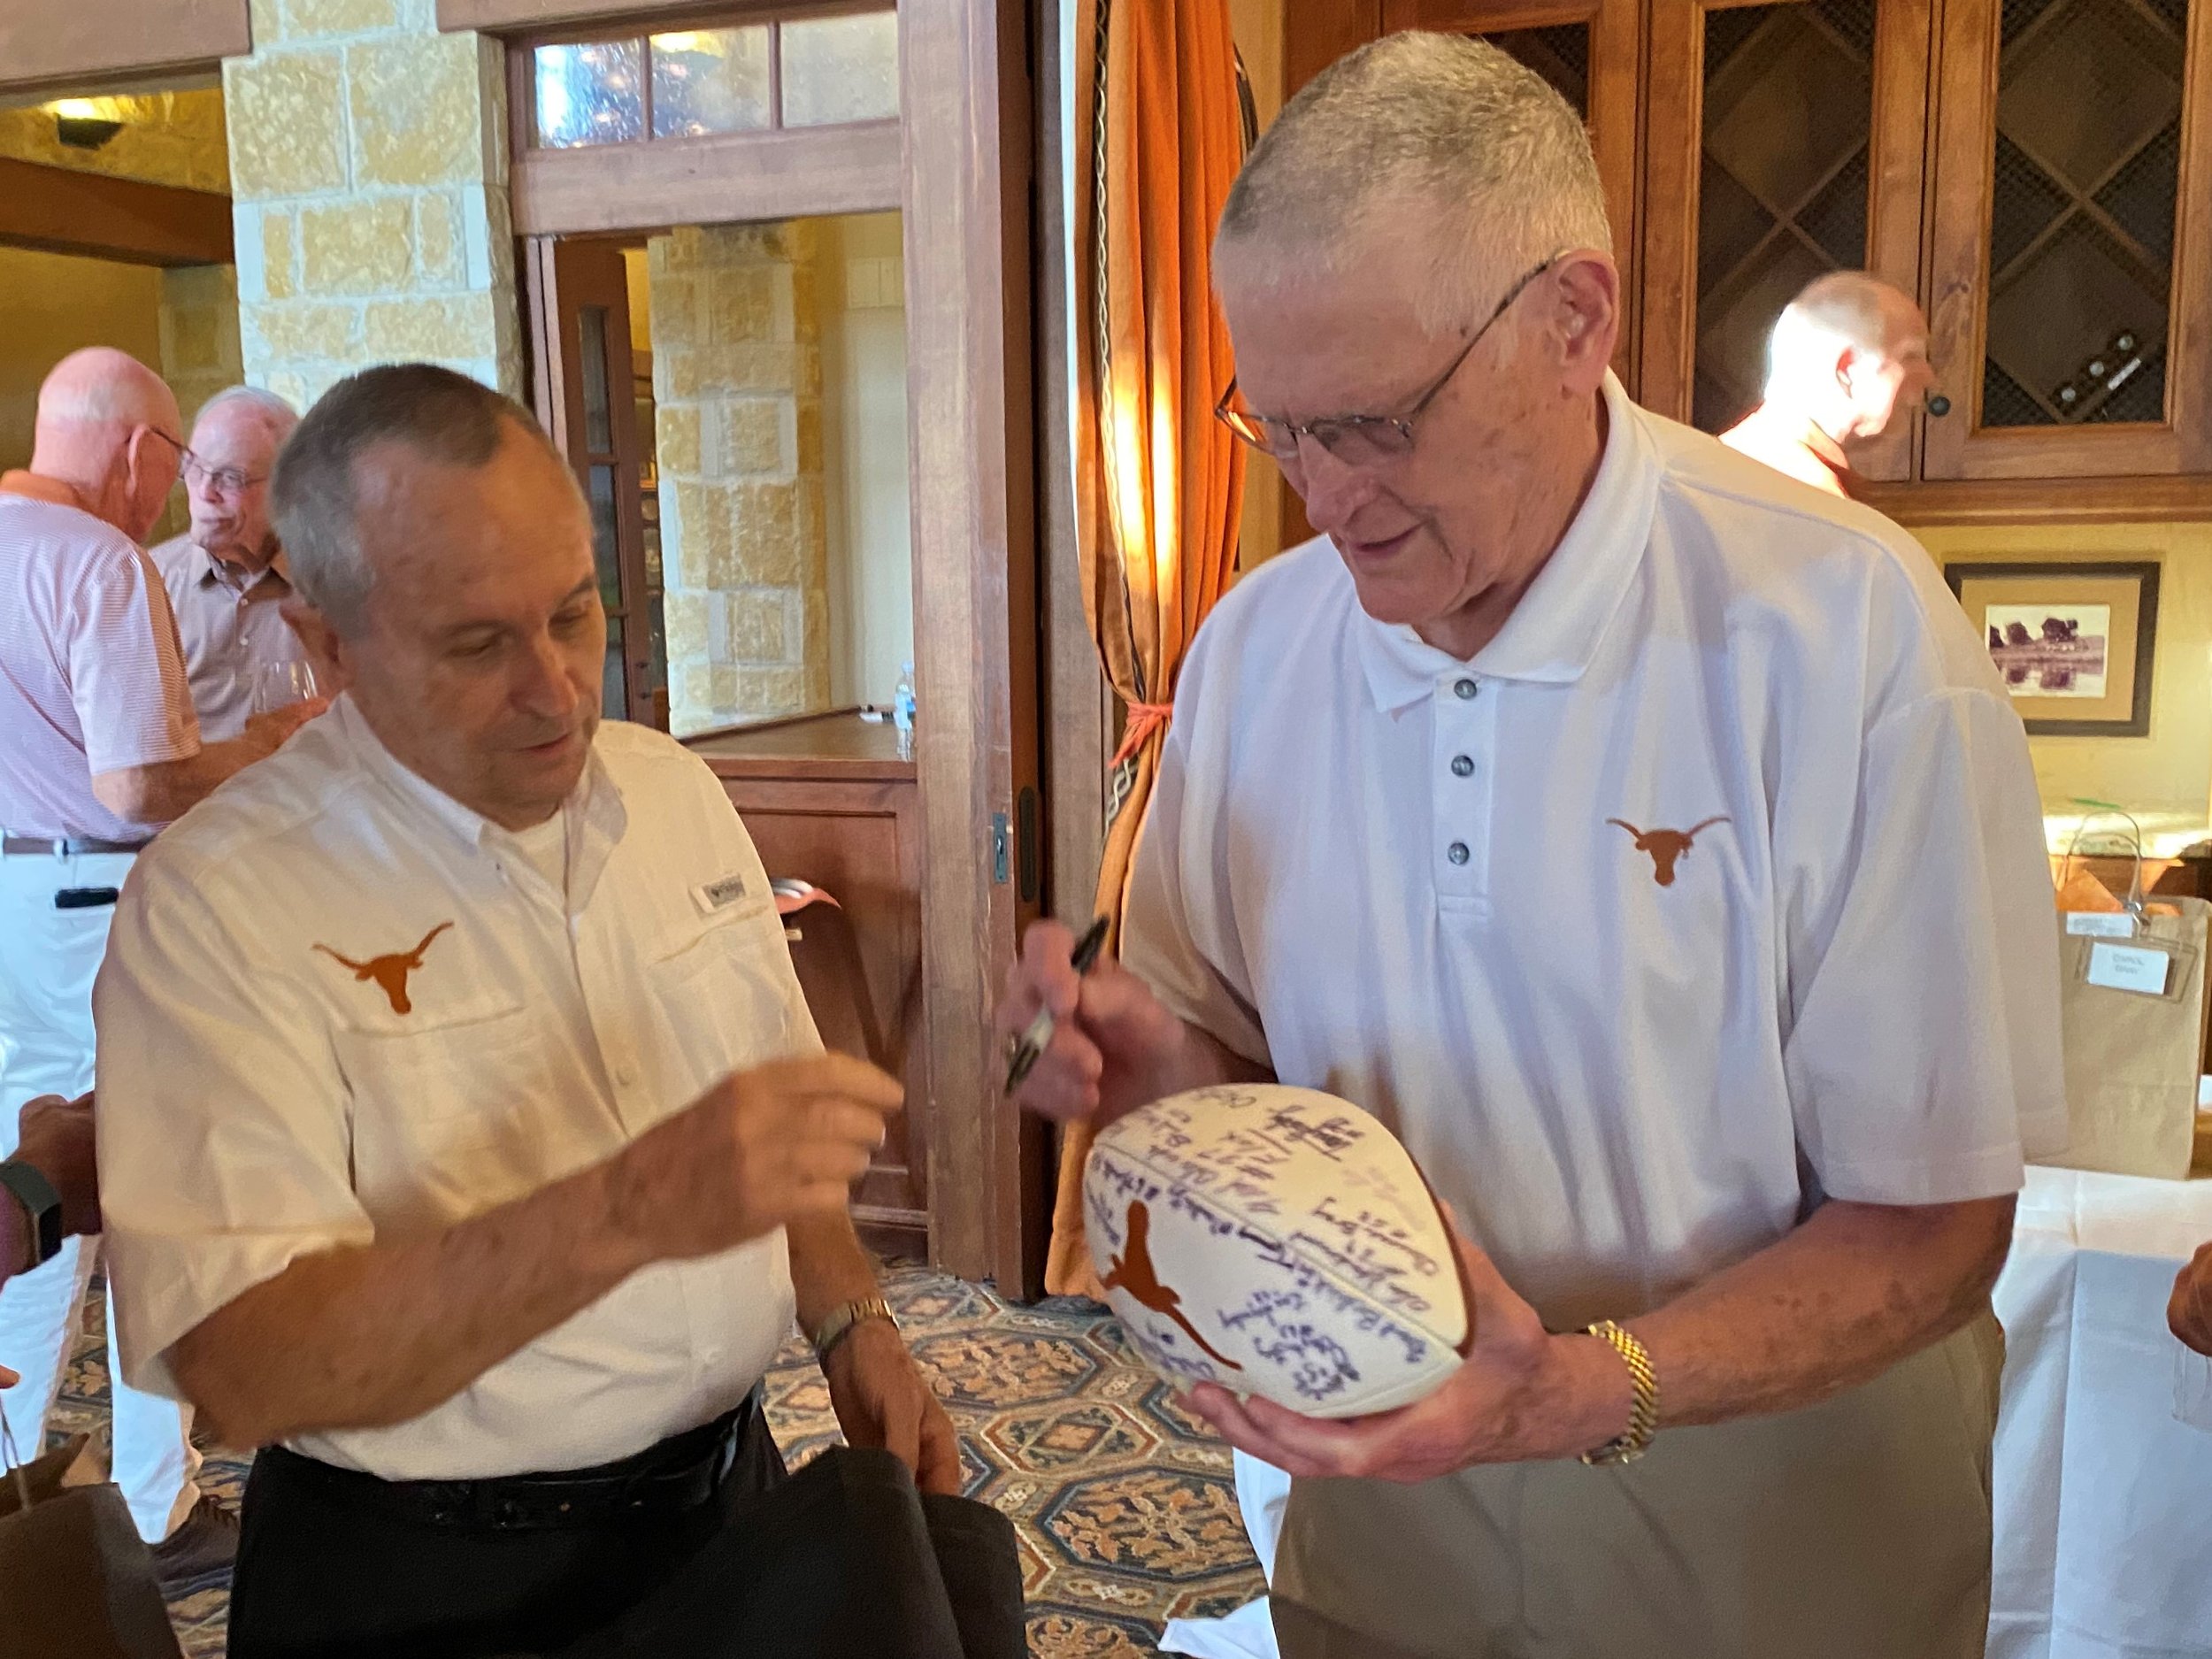 2023 -Staley Faulker, aka Bucket autographs a football for Dr. Bill Clark, an avid fan who made a special wooden plaque for each of the 1963 Longhorns attending the 60th anniversary reunion on September 1 2023.JPG